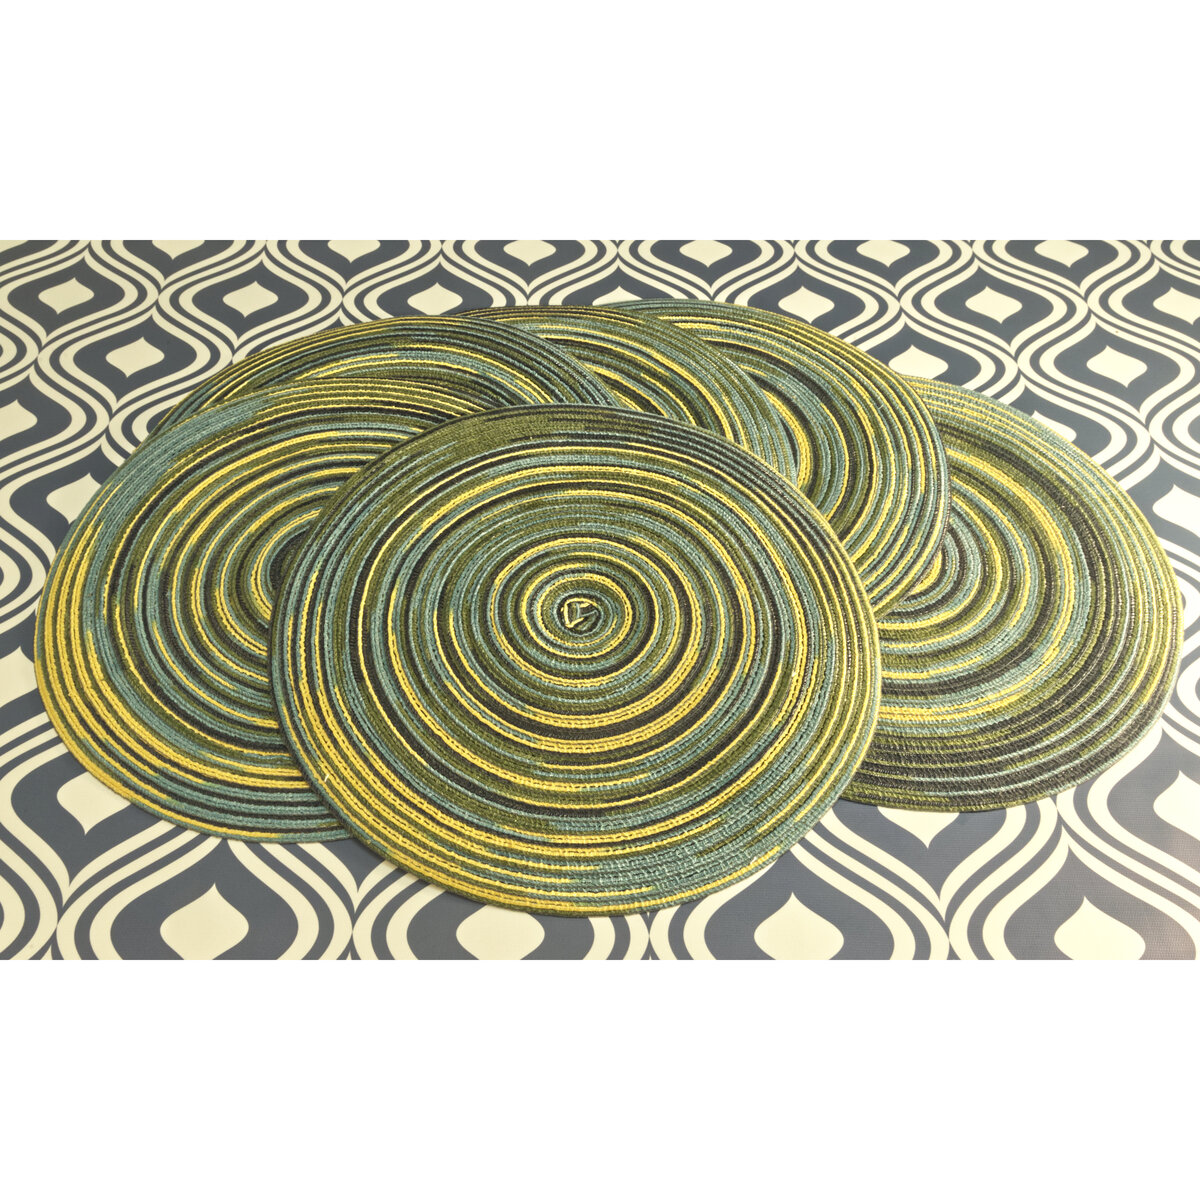 Green Spiral Weave Placemats